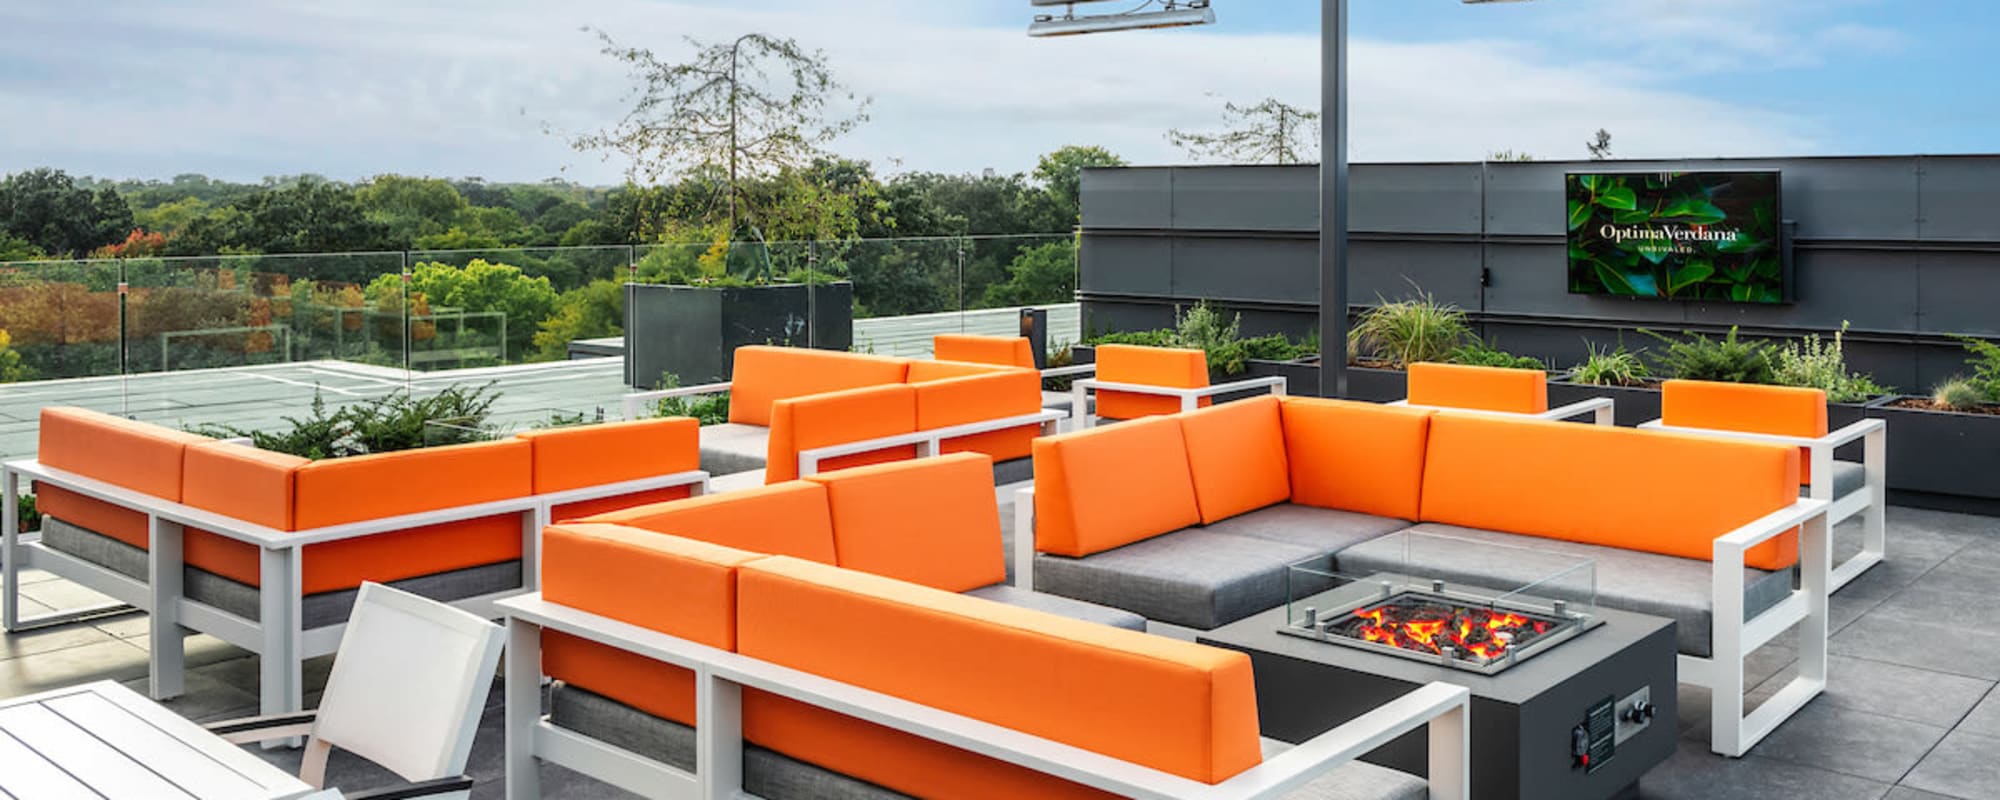 Deck top seating with orange chairs at Optima Verdana® in Wilmette, Illinois